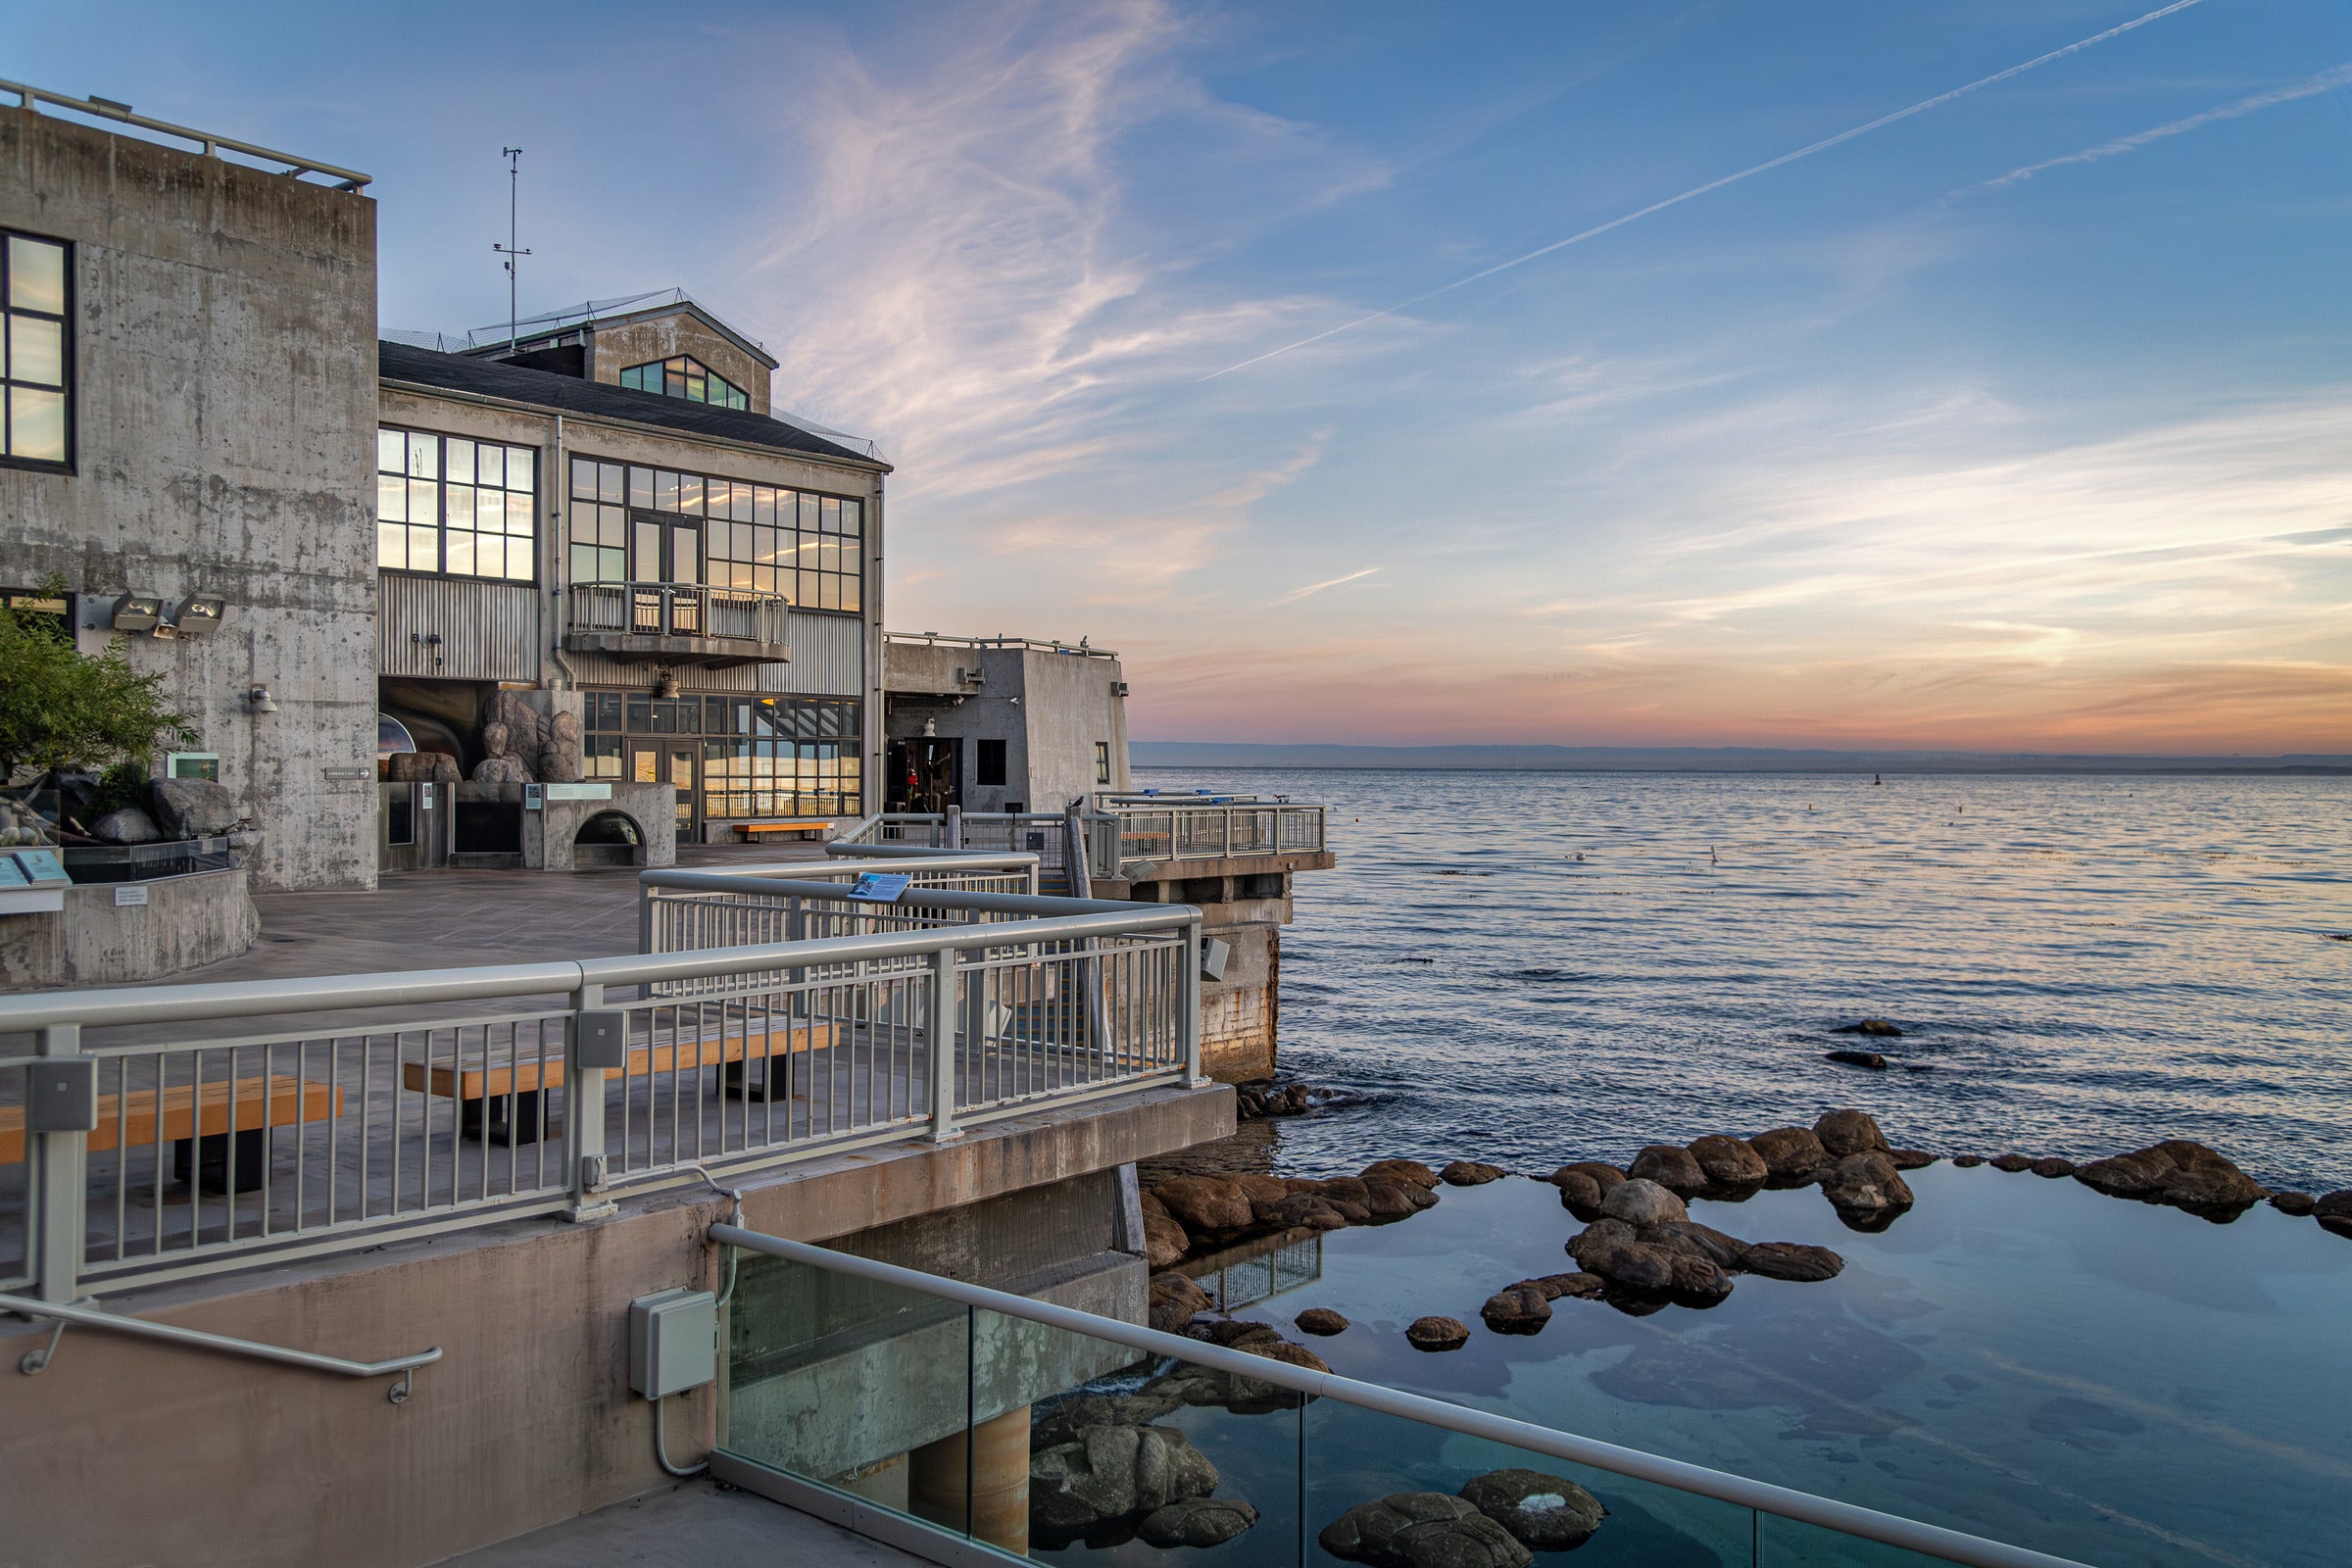 Sunrise off the Back Deck of the Monterey Bay Aquarium and a view of the tide pool